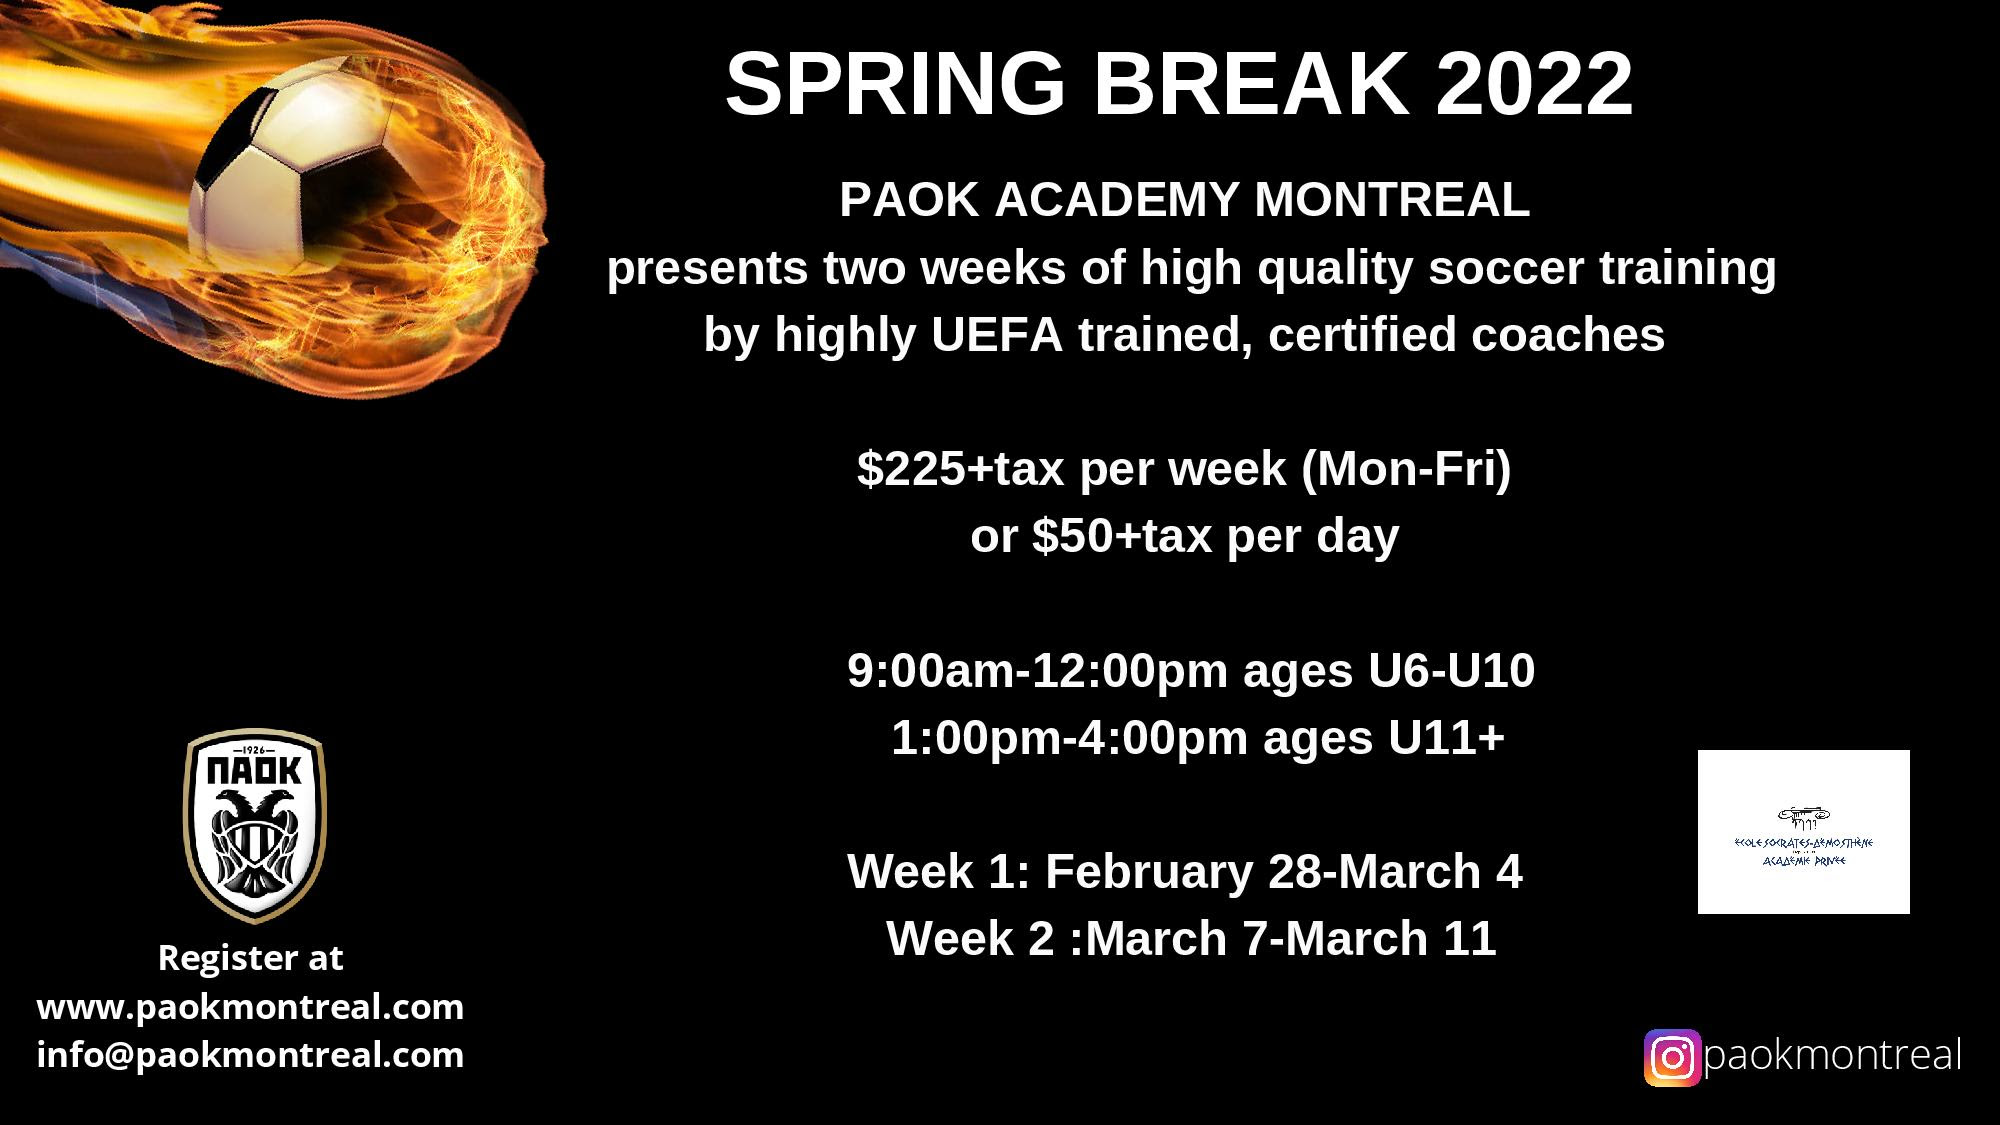 PAOK Academy is organizing a Soccer Camp during spring break!